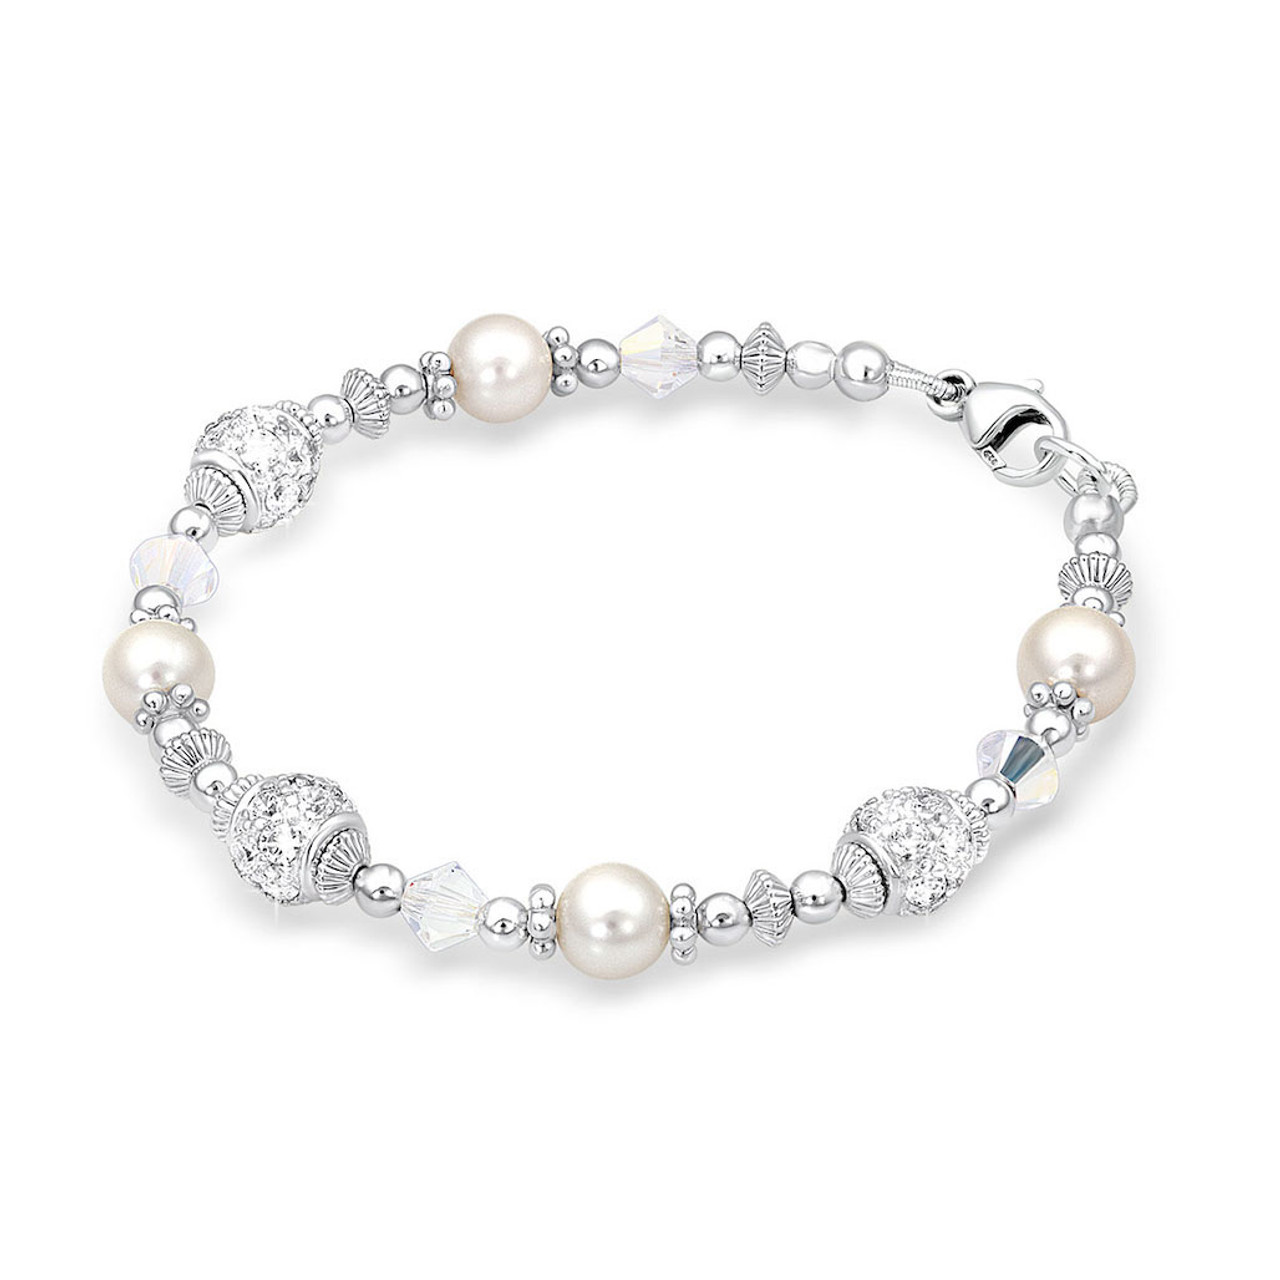 Young Girl's Silver Bracelet